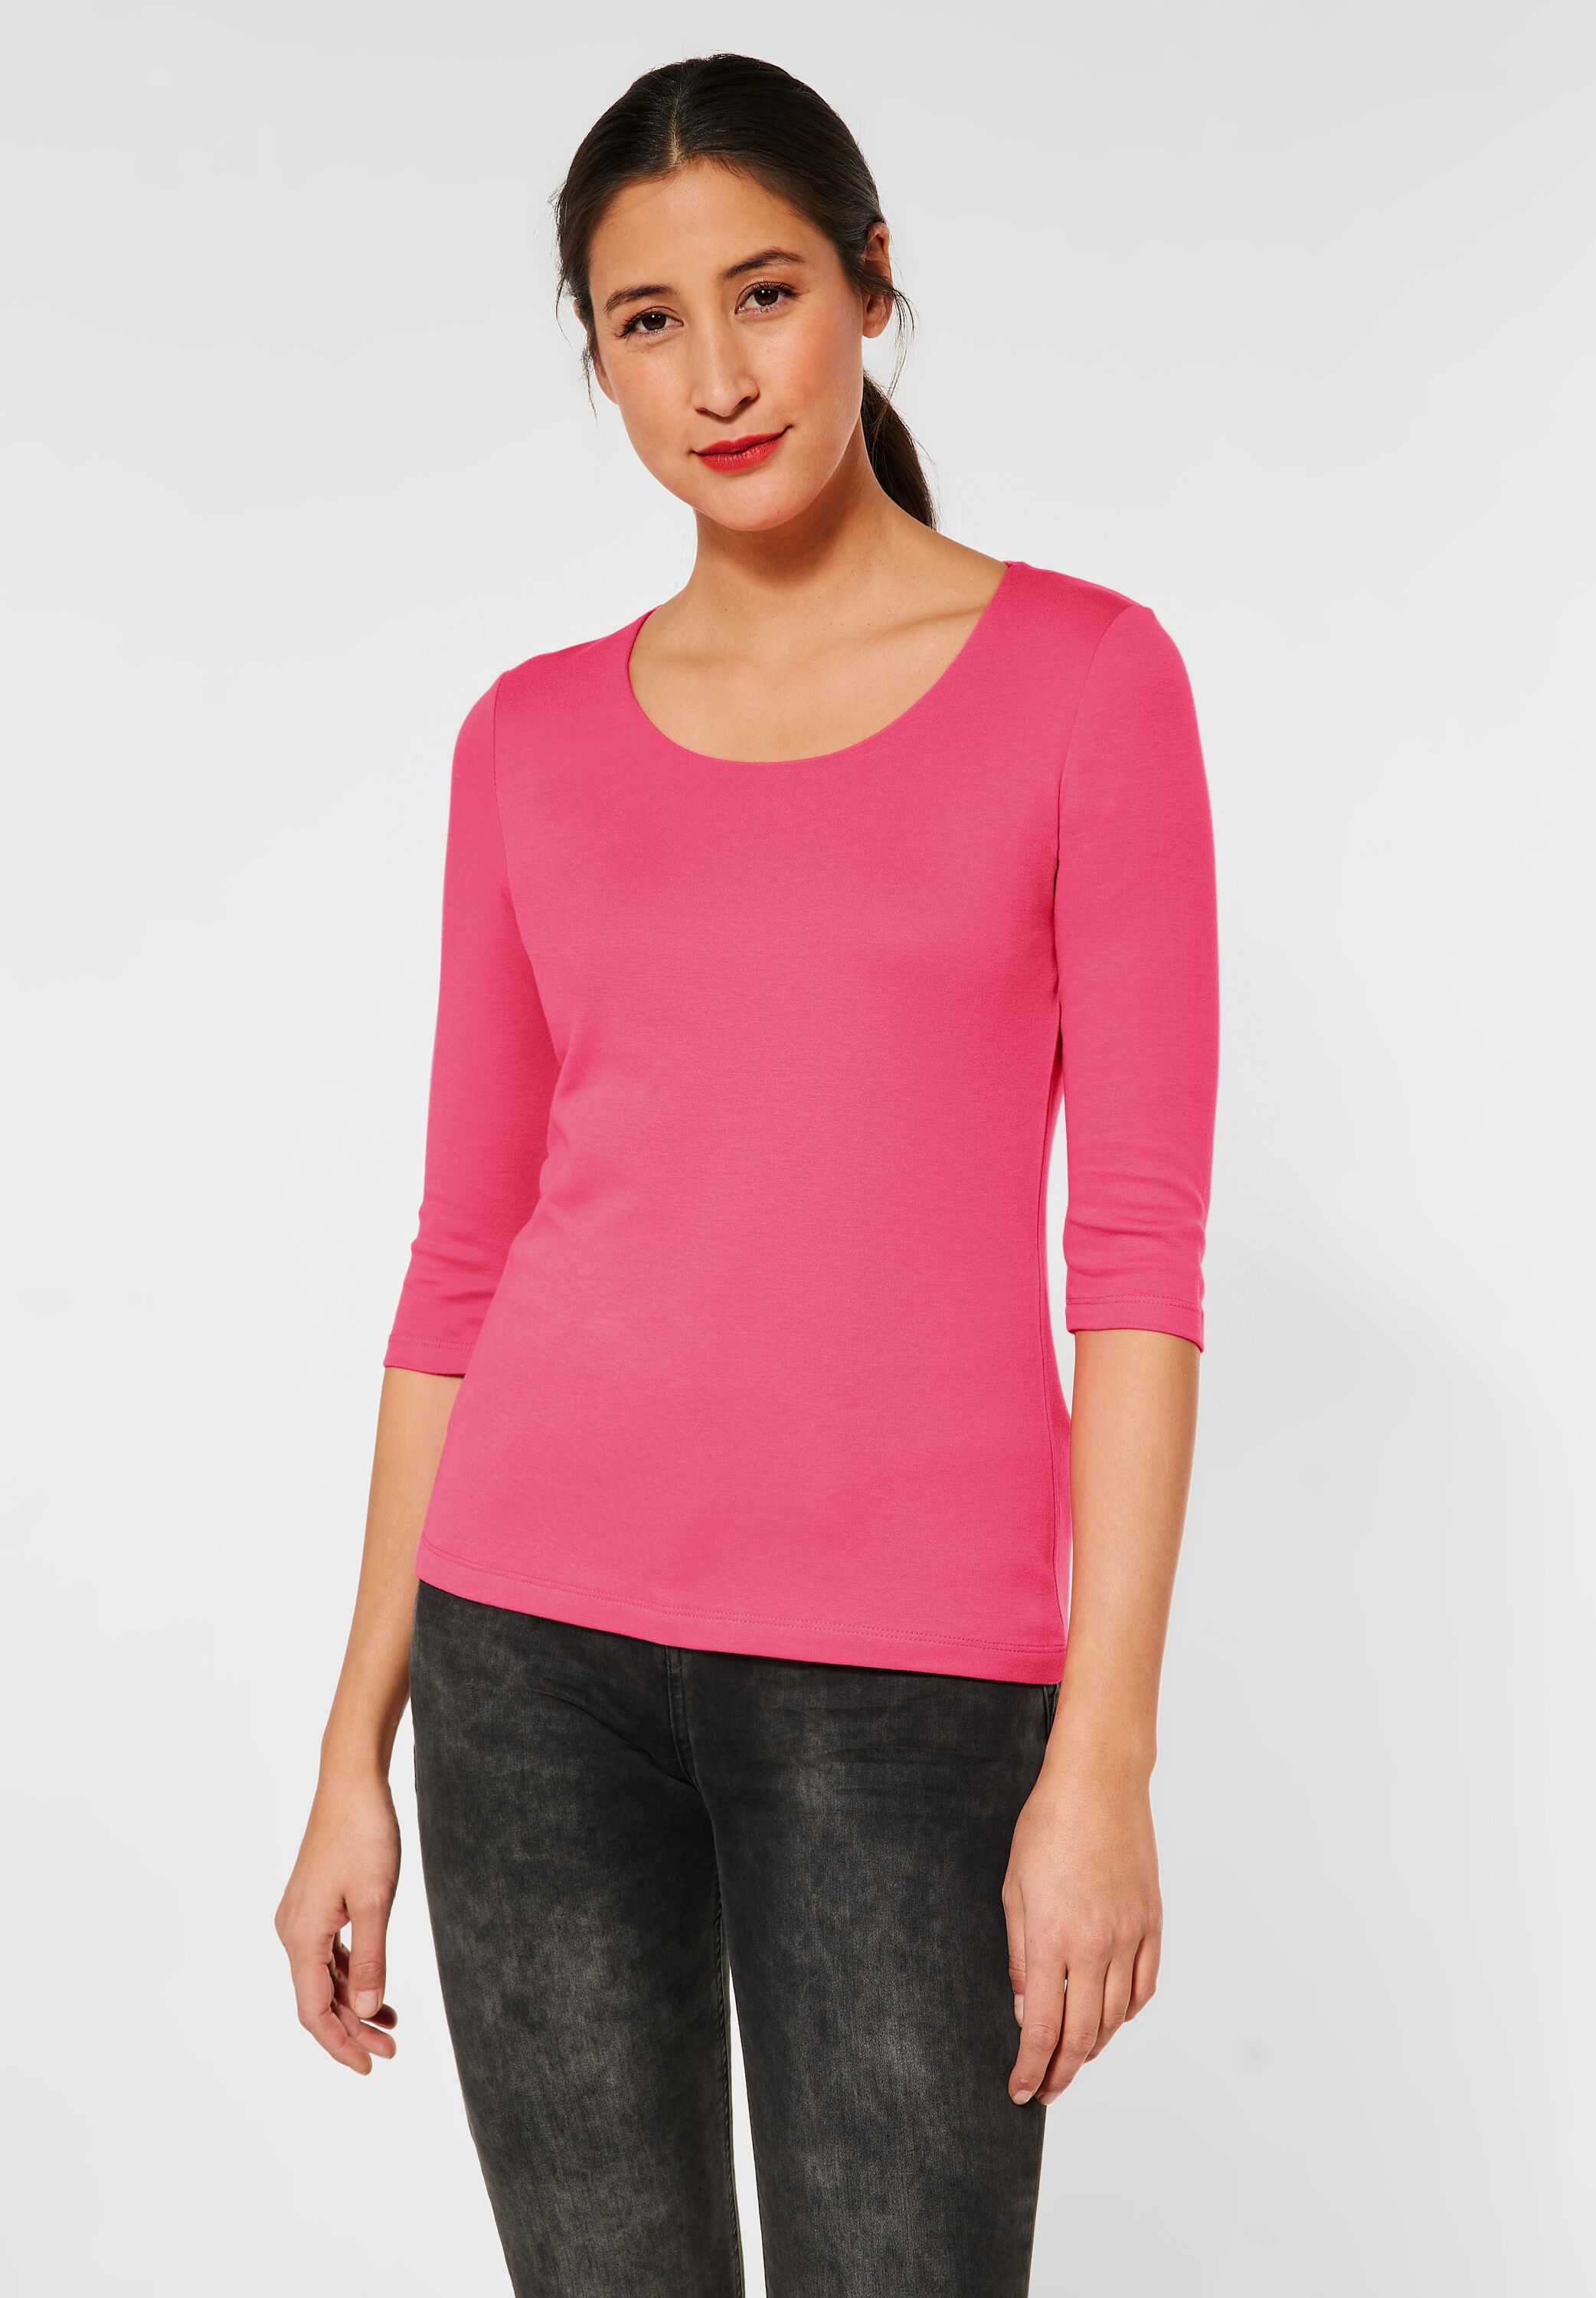 Street One Shirt reduziert Rose SALE - Berry A317588-14647 in Mode Pania CONCEPT im